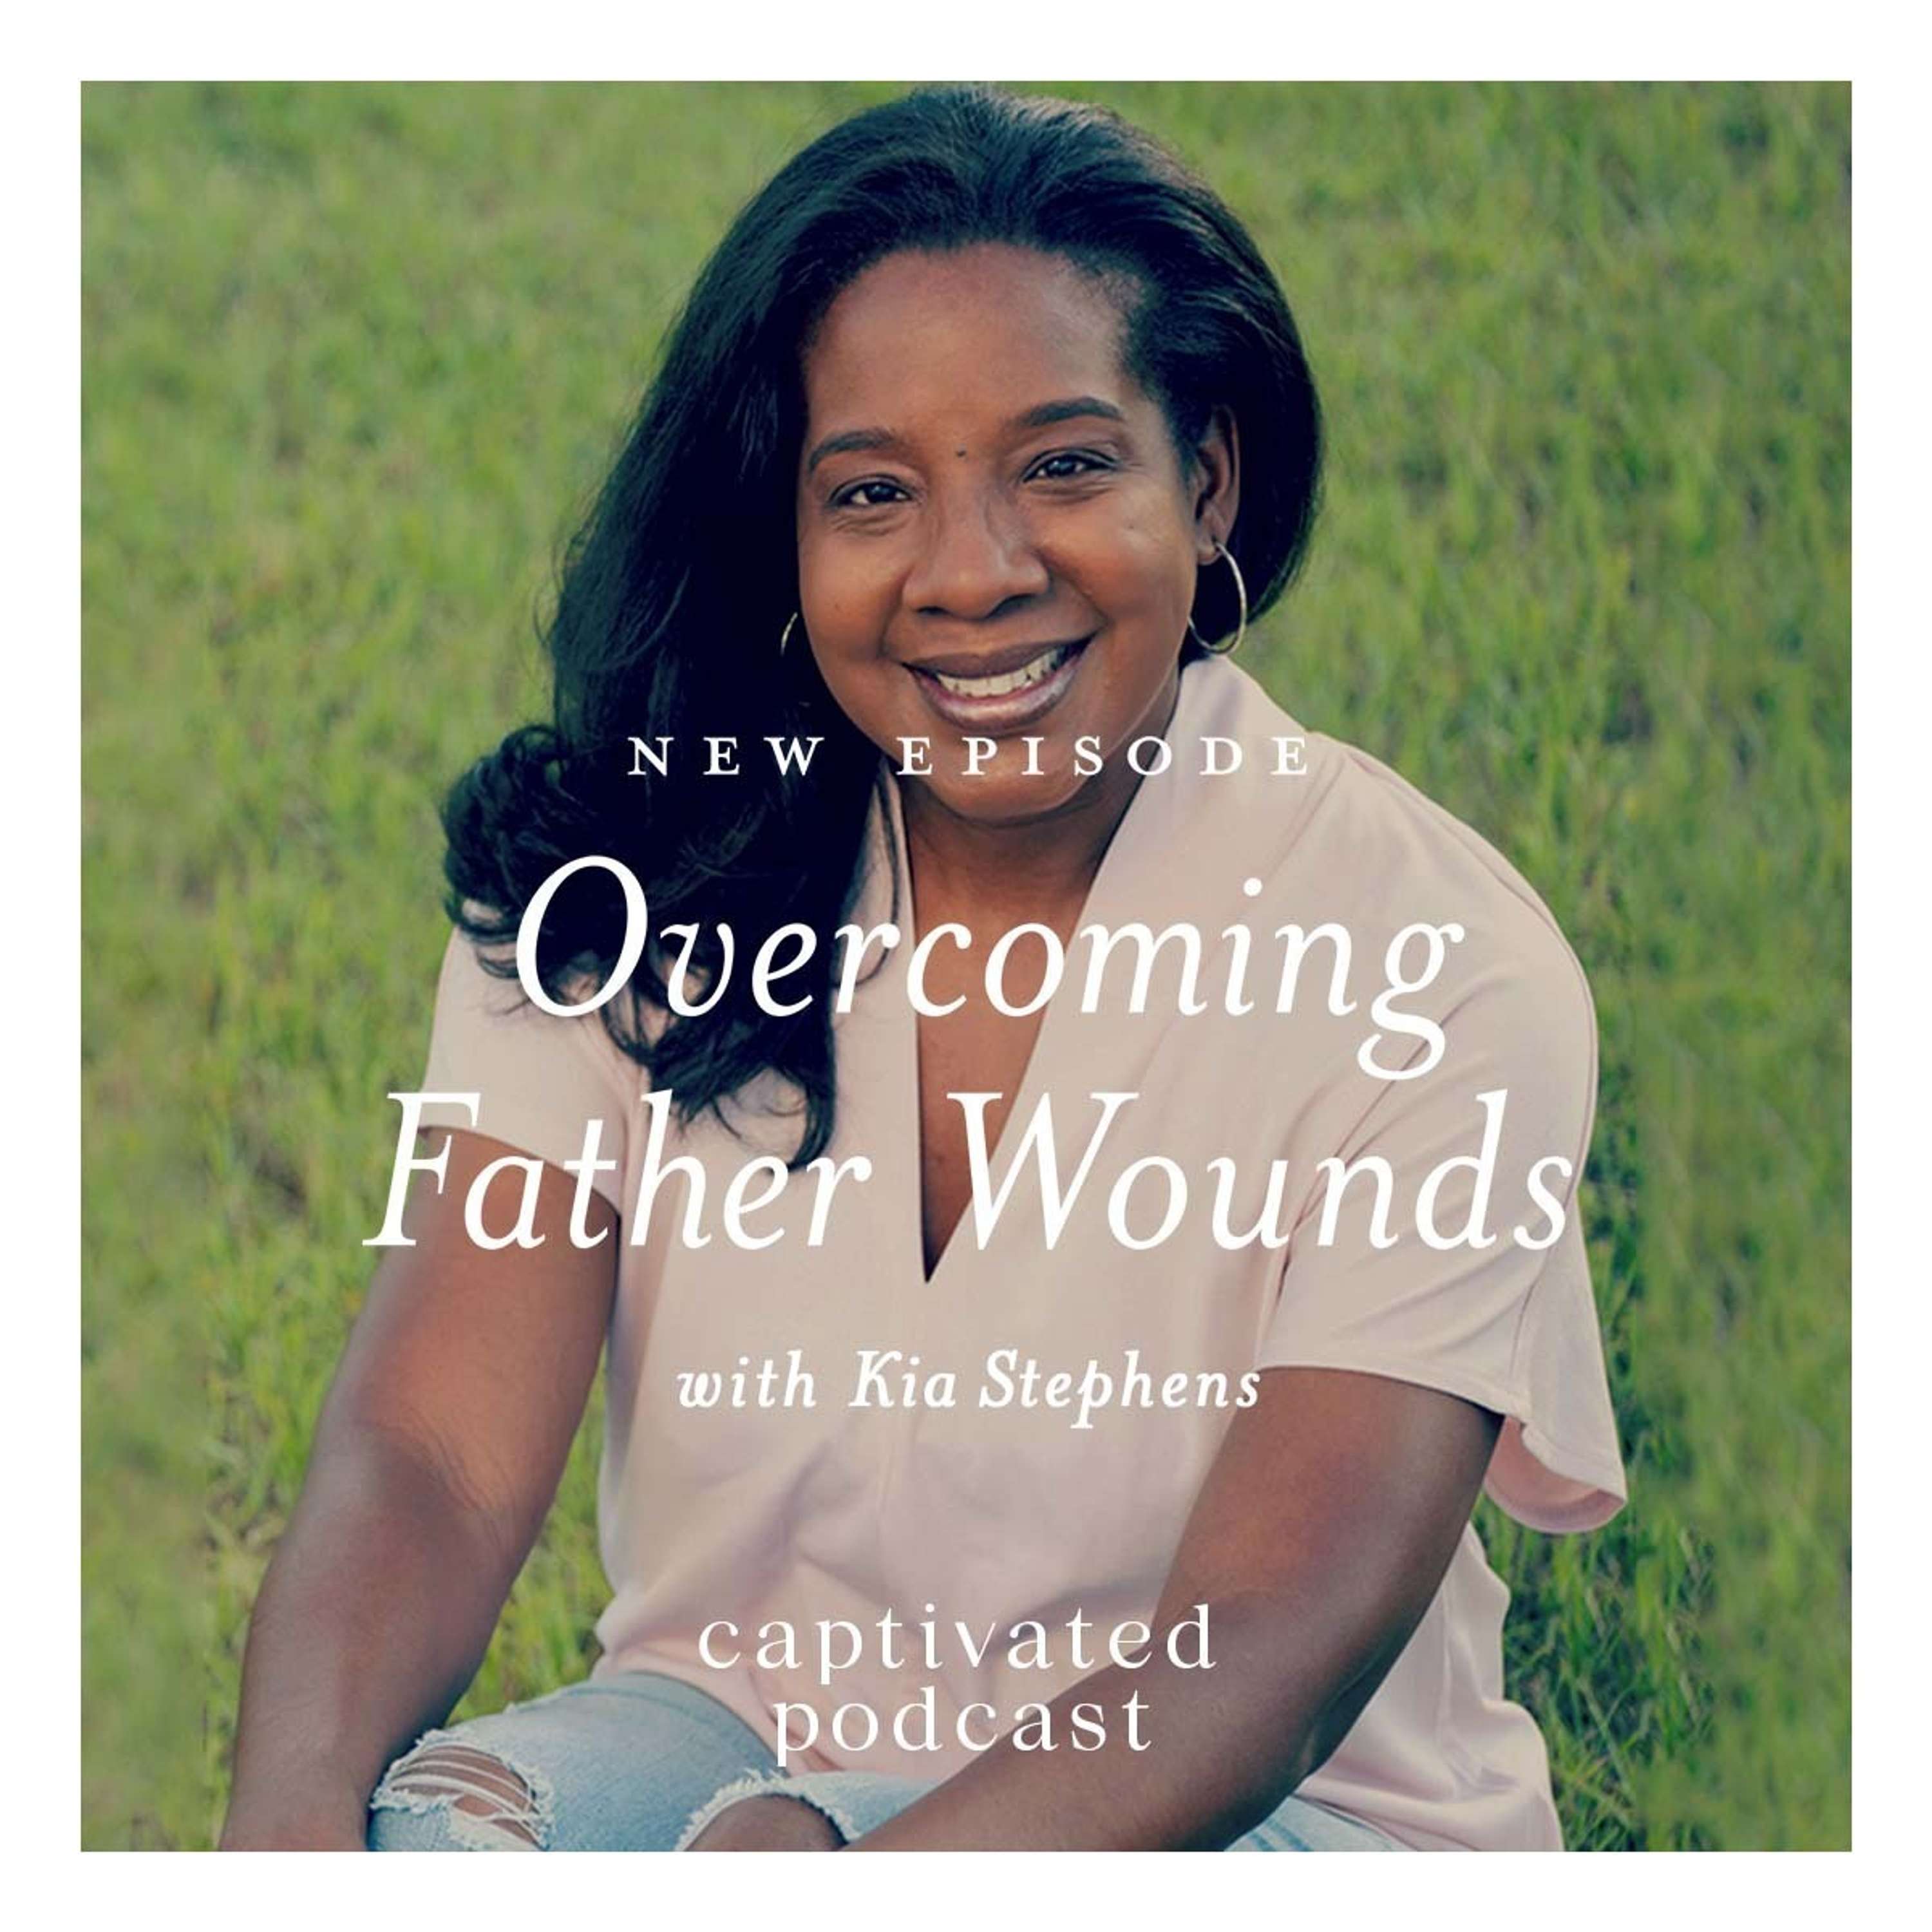 Overcoming Father Wounds with Kia Stephens